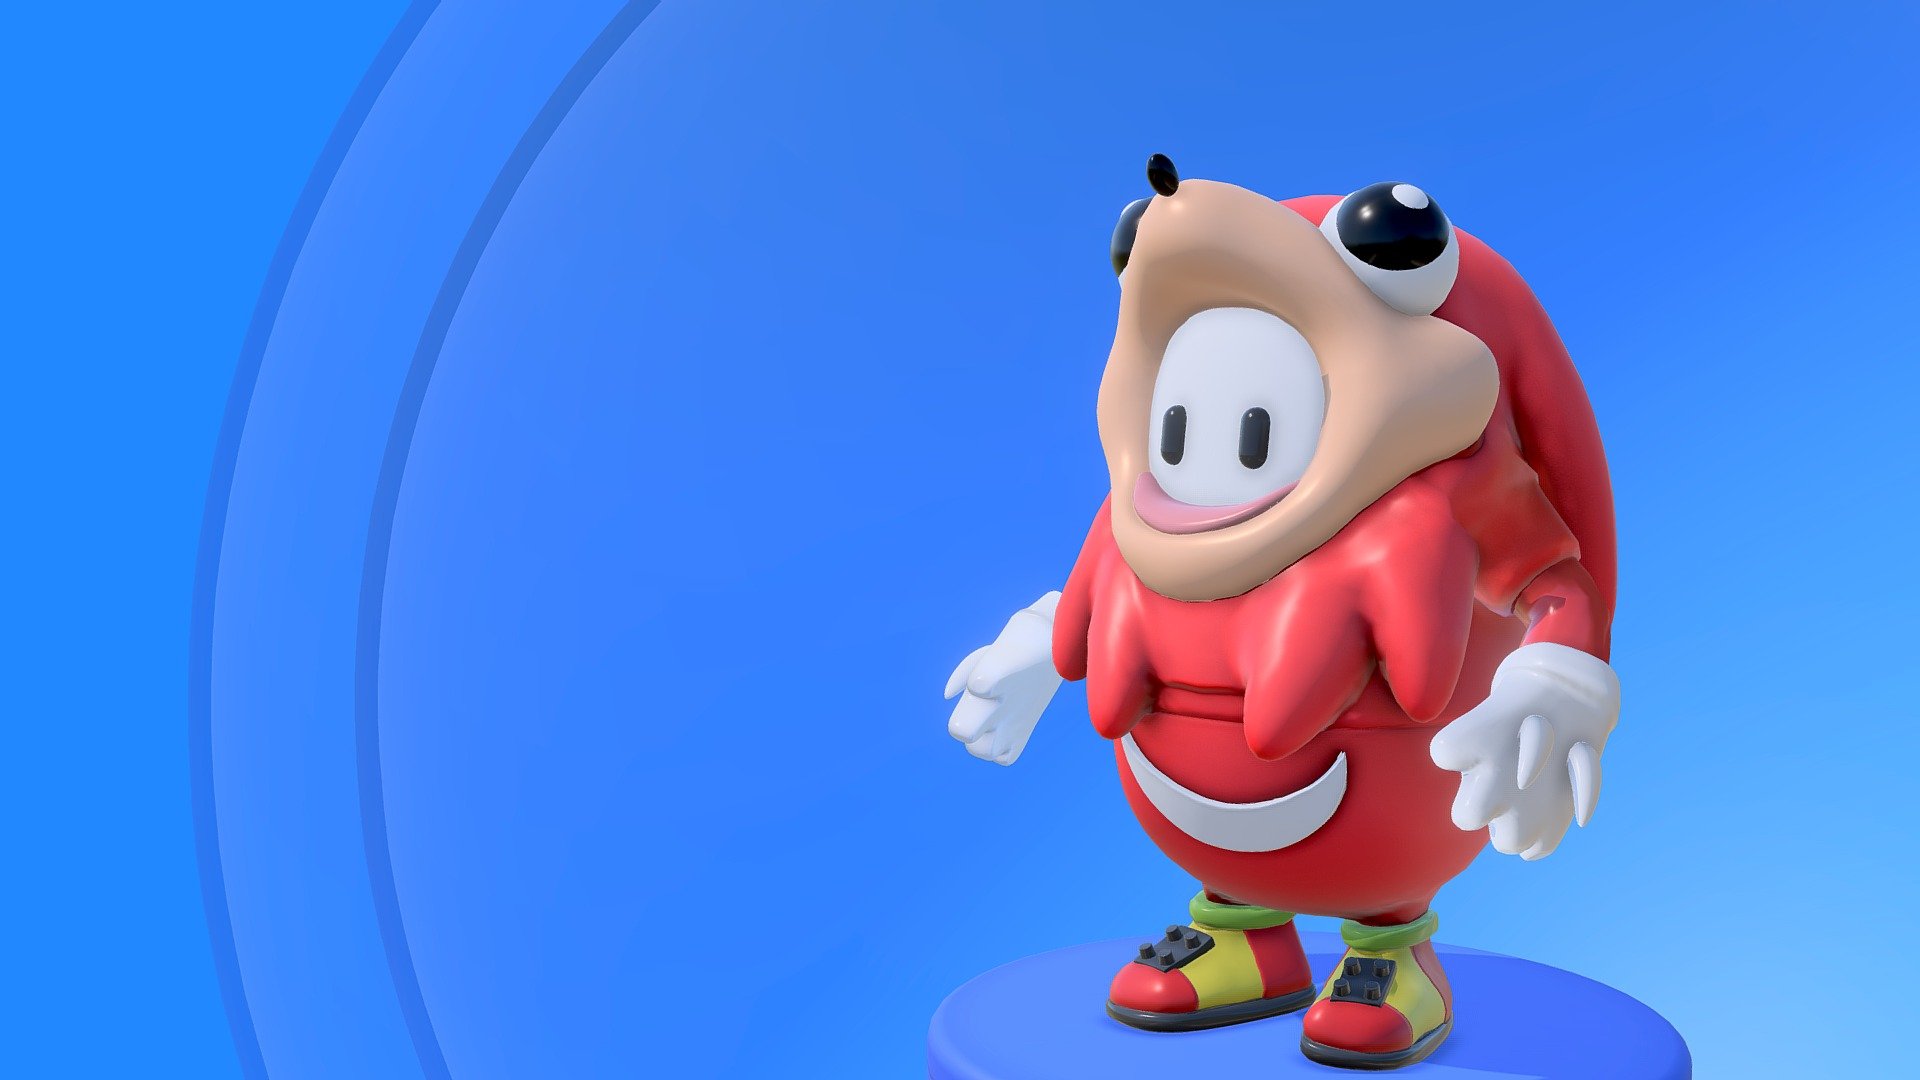 Uganda Knuckles Wallpaper  Download to your mobile from PHONEKY